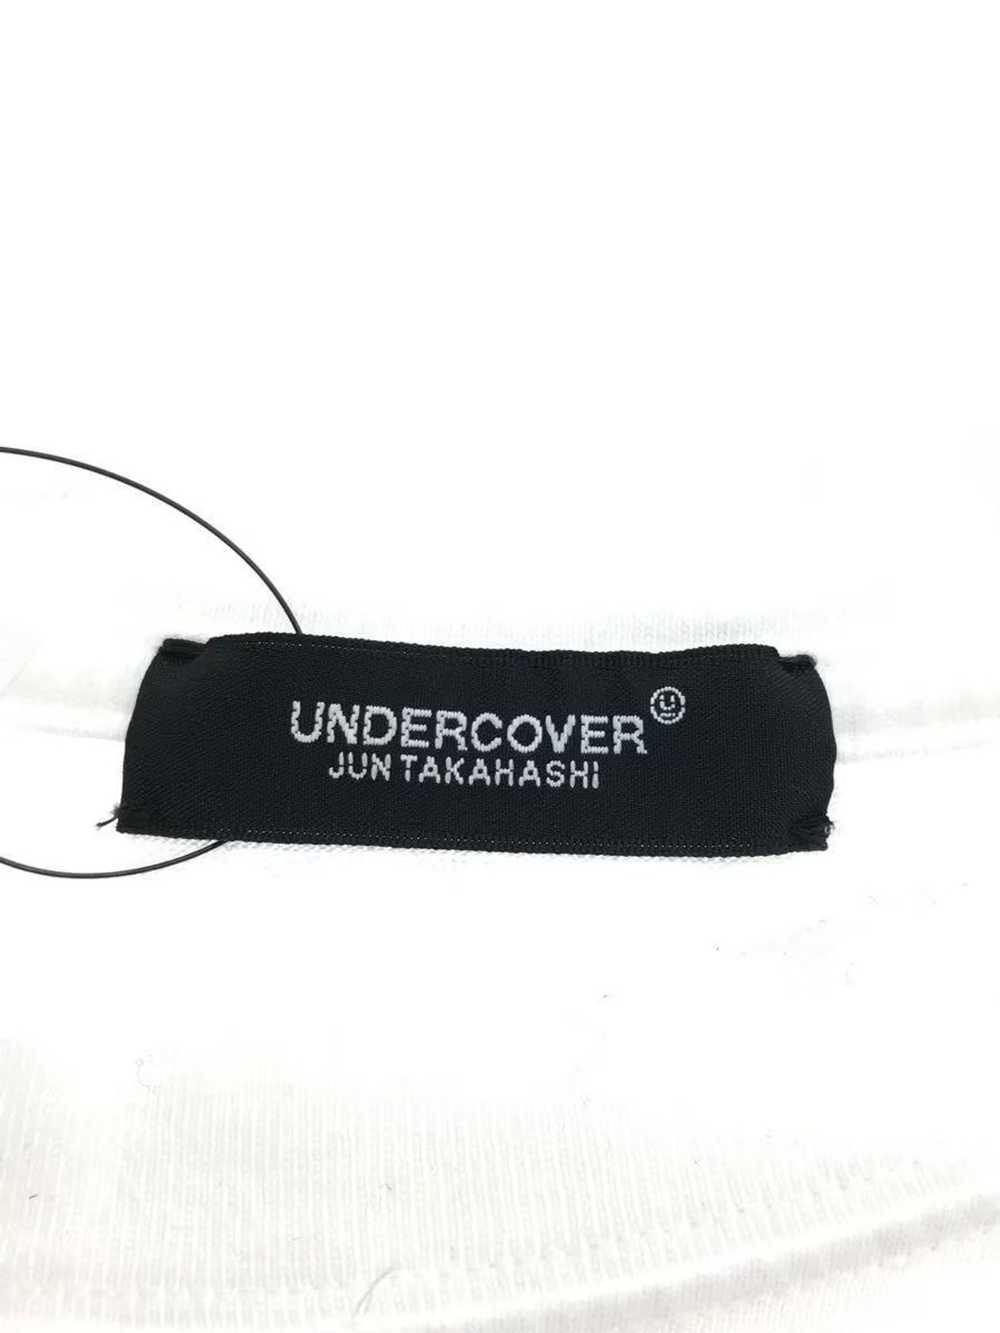 Undercover "We Make Noise Not Clothes" Tee - image 5